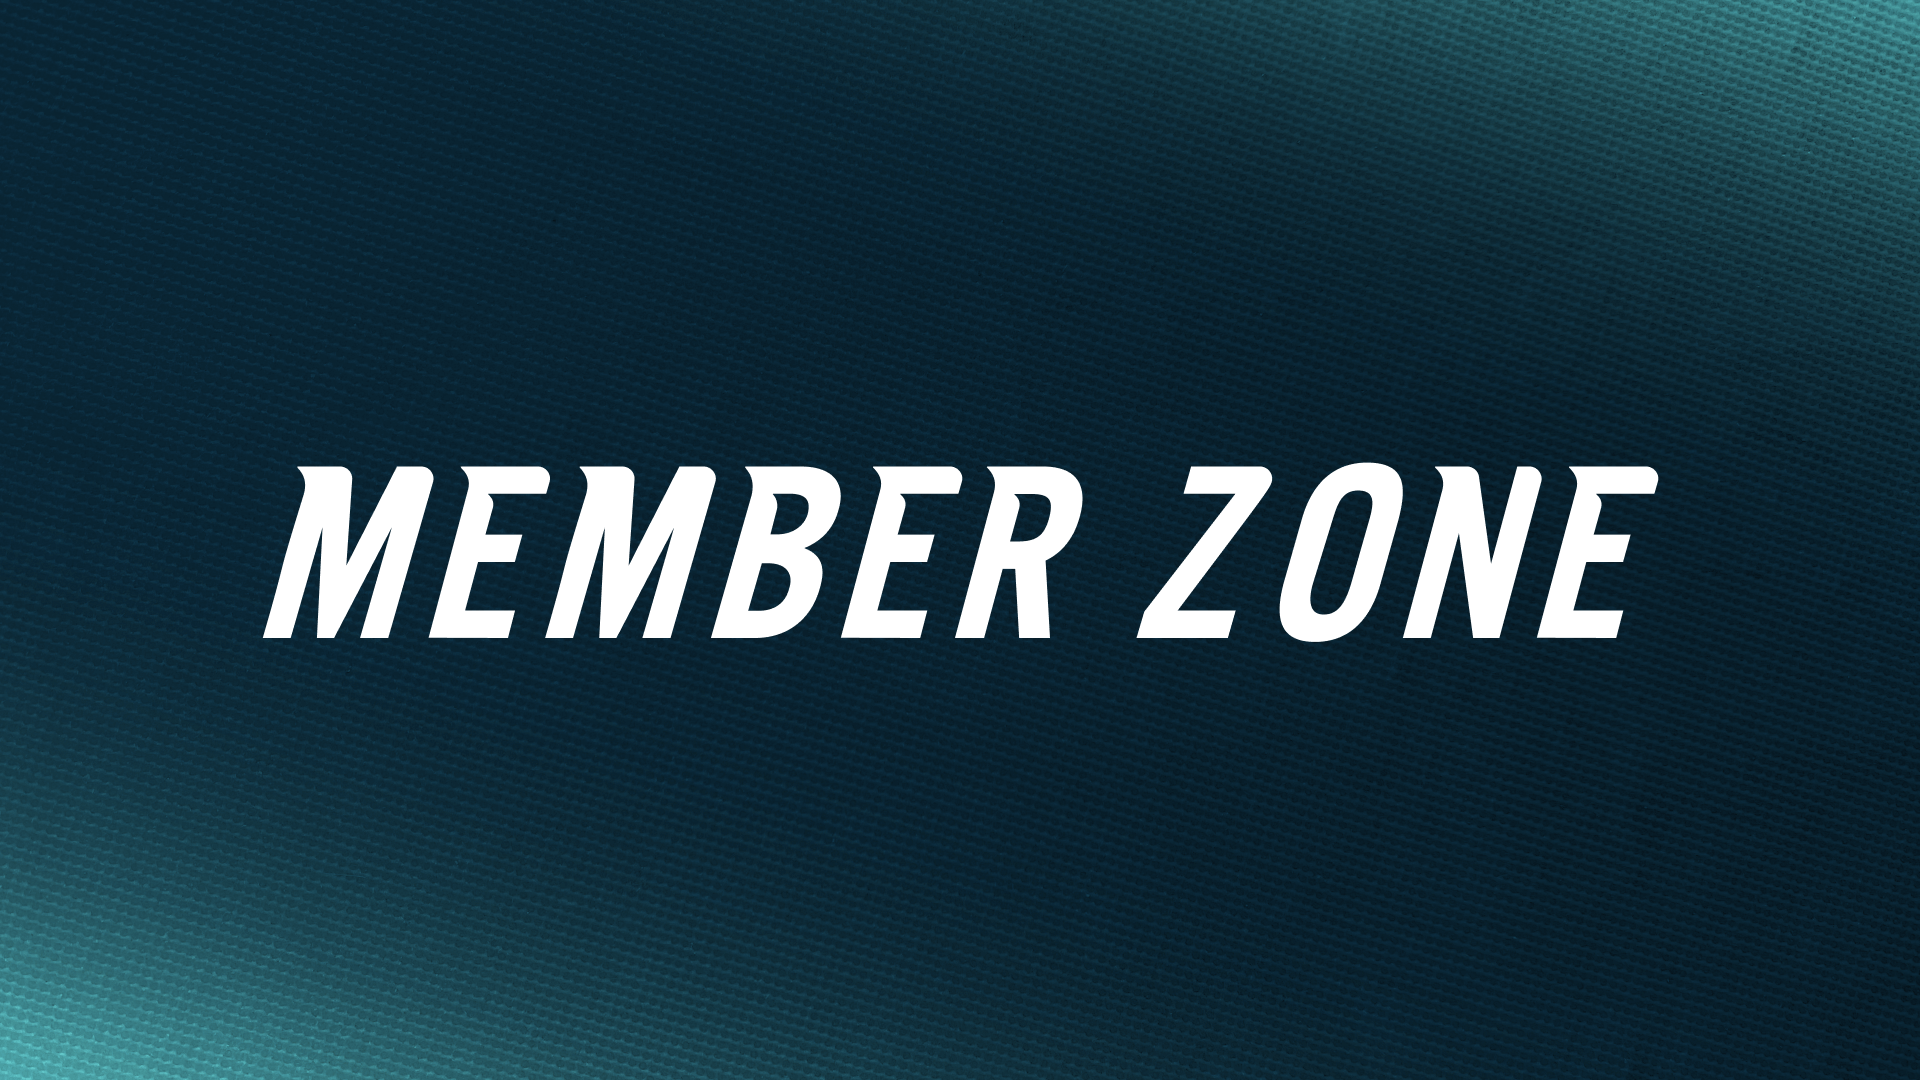 A graphic with the text "Member Zone" on a navy background.